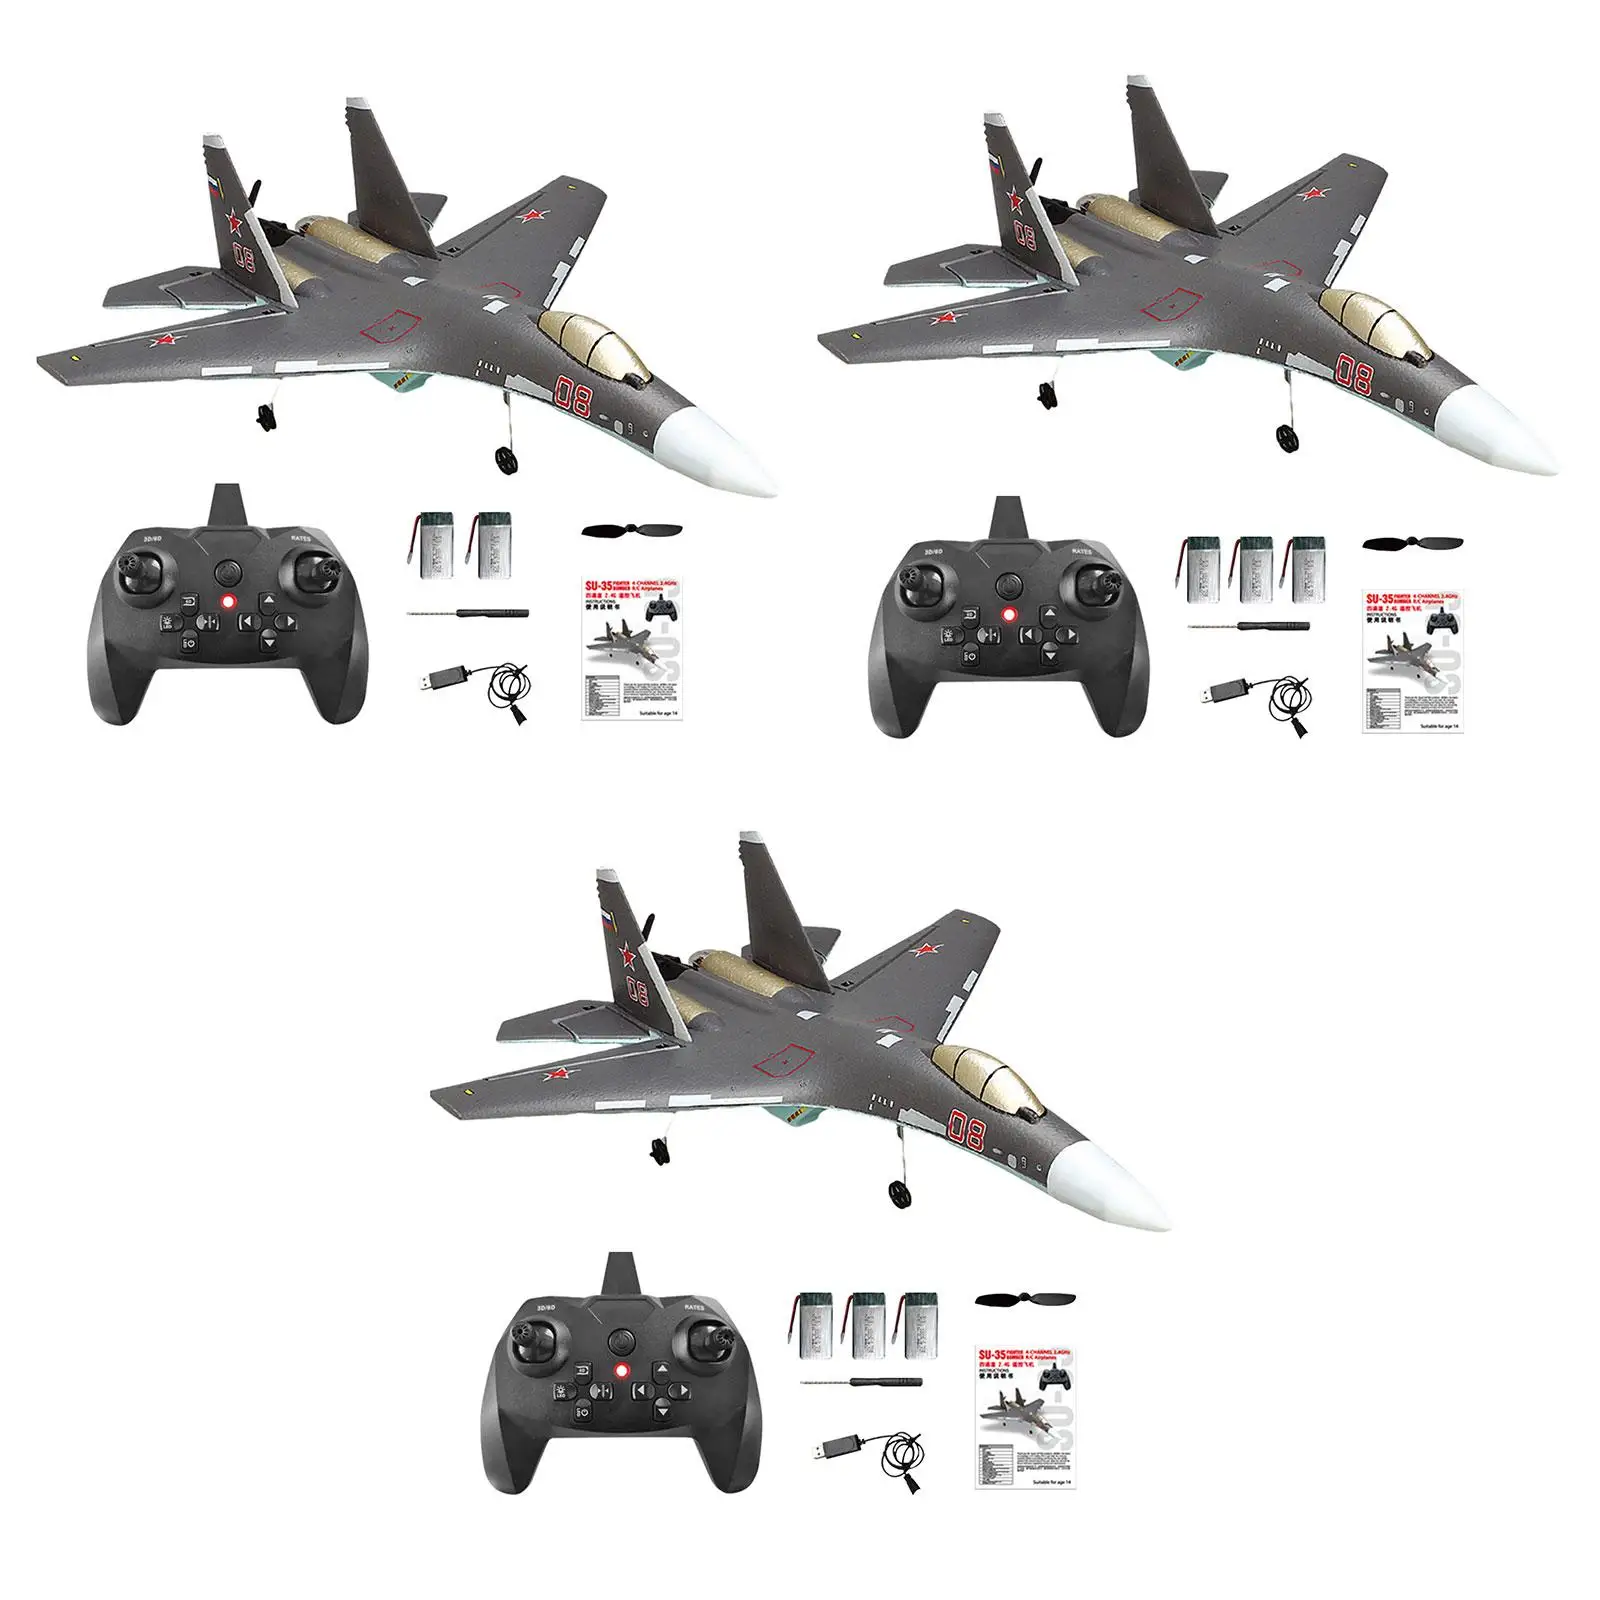 6 Axis Fighter 4 Ch Distance 300Meter Altitude Hold Remote Control Jet Airplane for Boys Kids Teens Beginner Adults